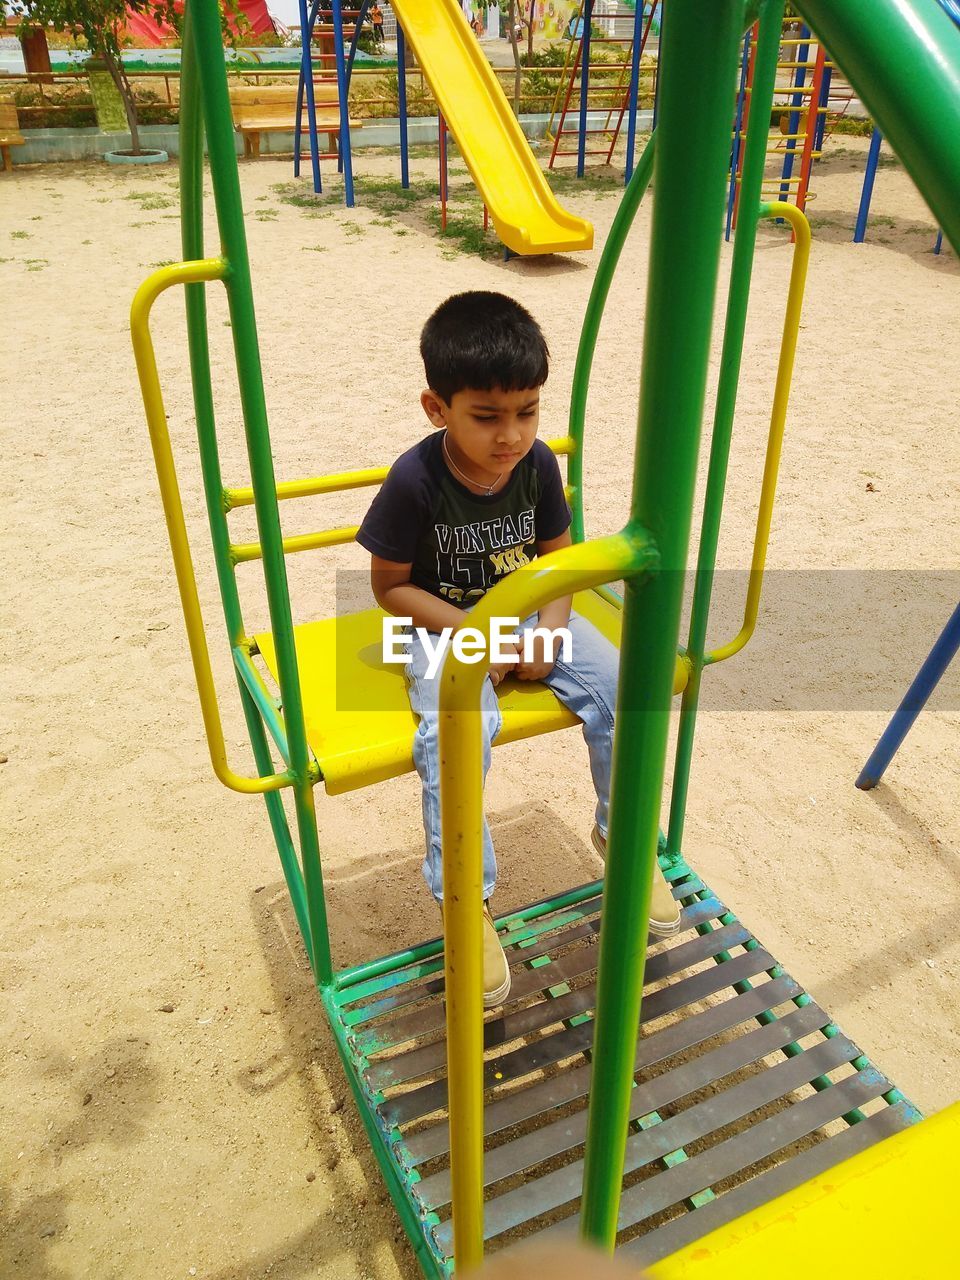 
boy sitting on outdoor play equipment at playground